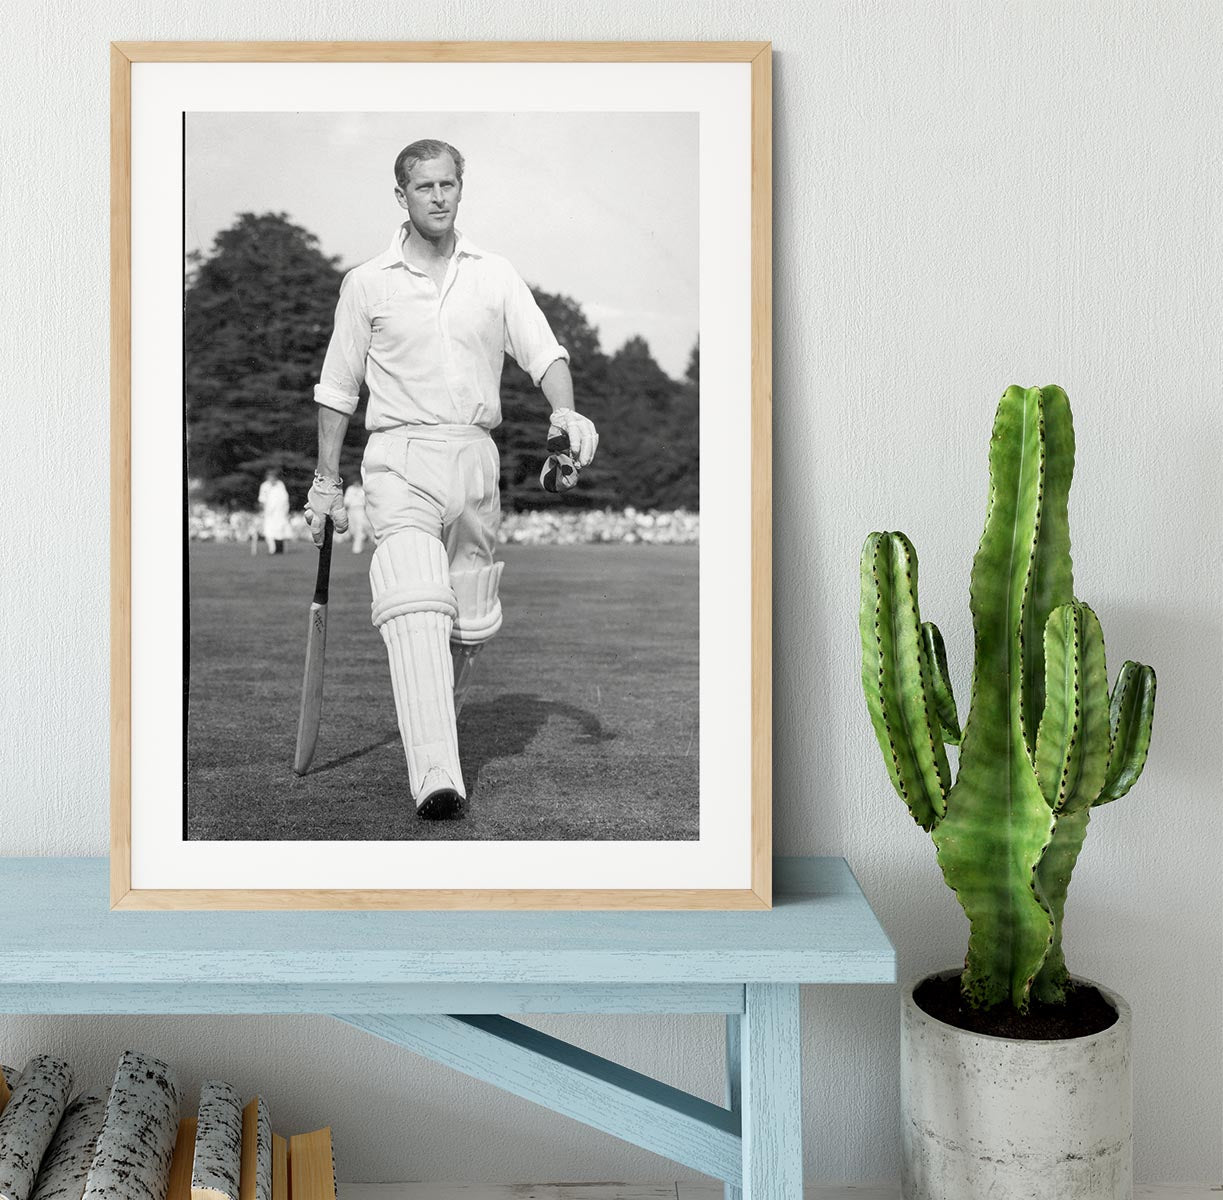 Prince Philip as cricket captain in a charity match Framed Print - Canvas Art Rocks - 3